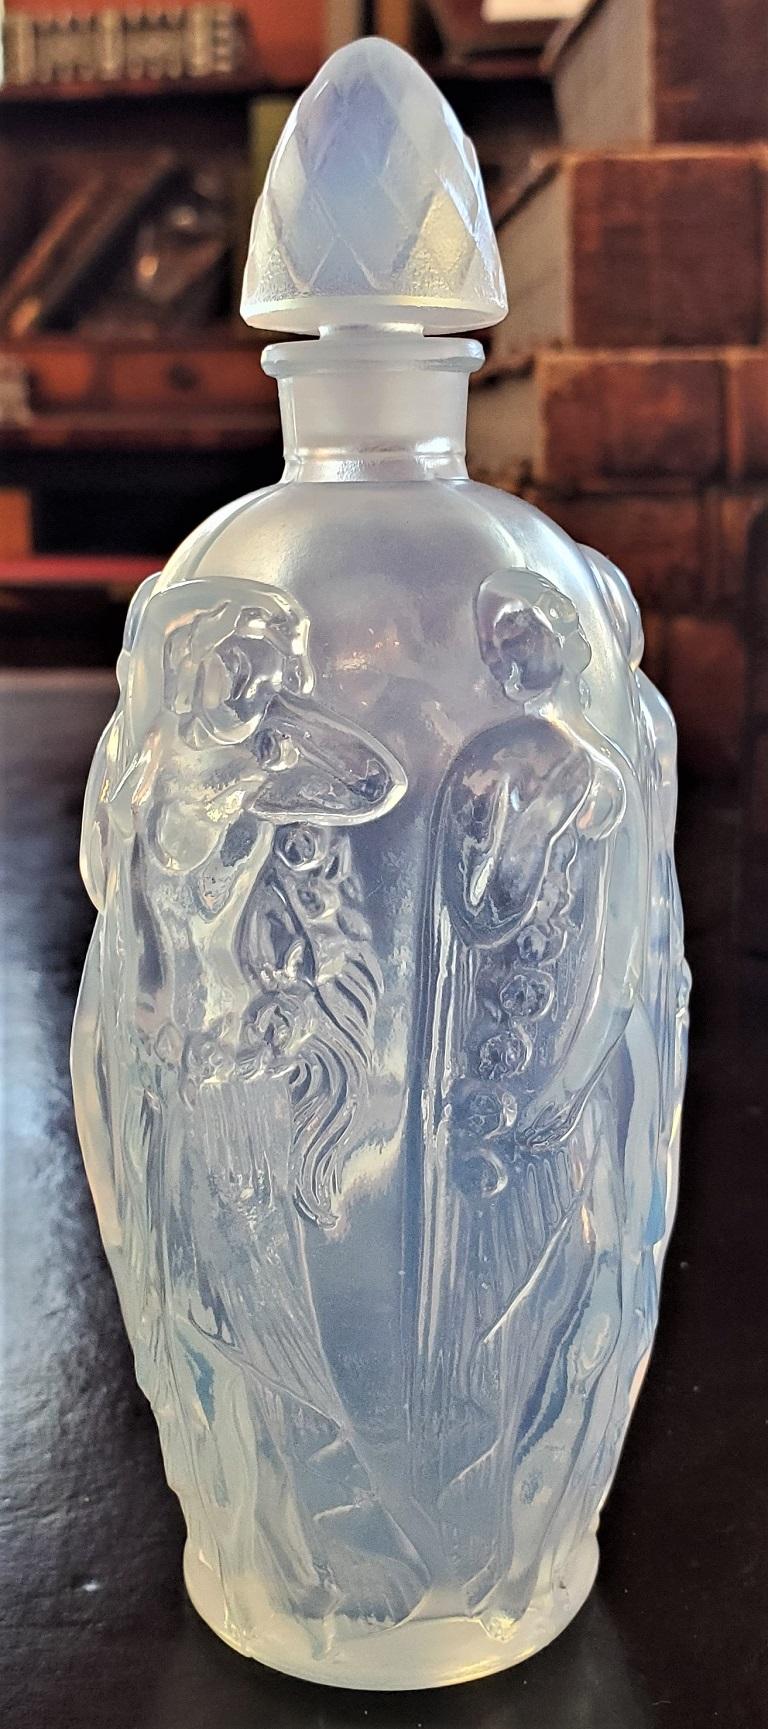 Presenting a lovely Sabino La Ronde Fleurie opalescent art glass perfume bottle in mint condition.

From circa 1950 and made in France by the famous maker, Sabino.

The bottle consists of opalescent pressed glass, giving it a blue tone or hue,